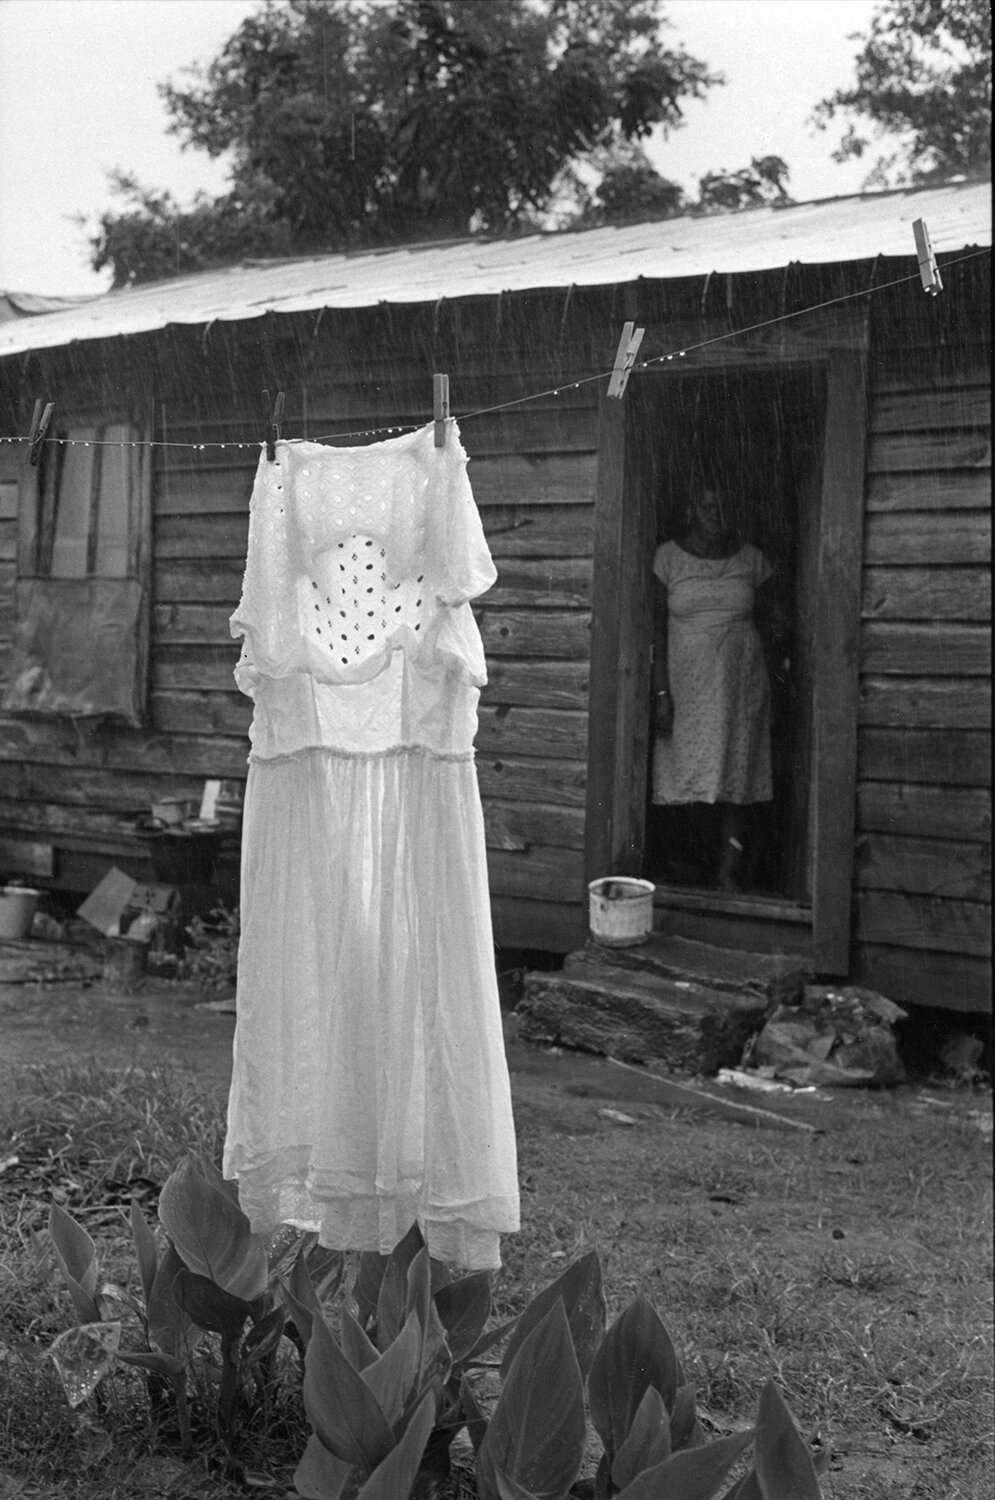   Dress in the rain , 1961 Silver Gelatin Print 7 × 4 3/4 in. (image size) The Do Good Fund, Inc., 2017-046 